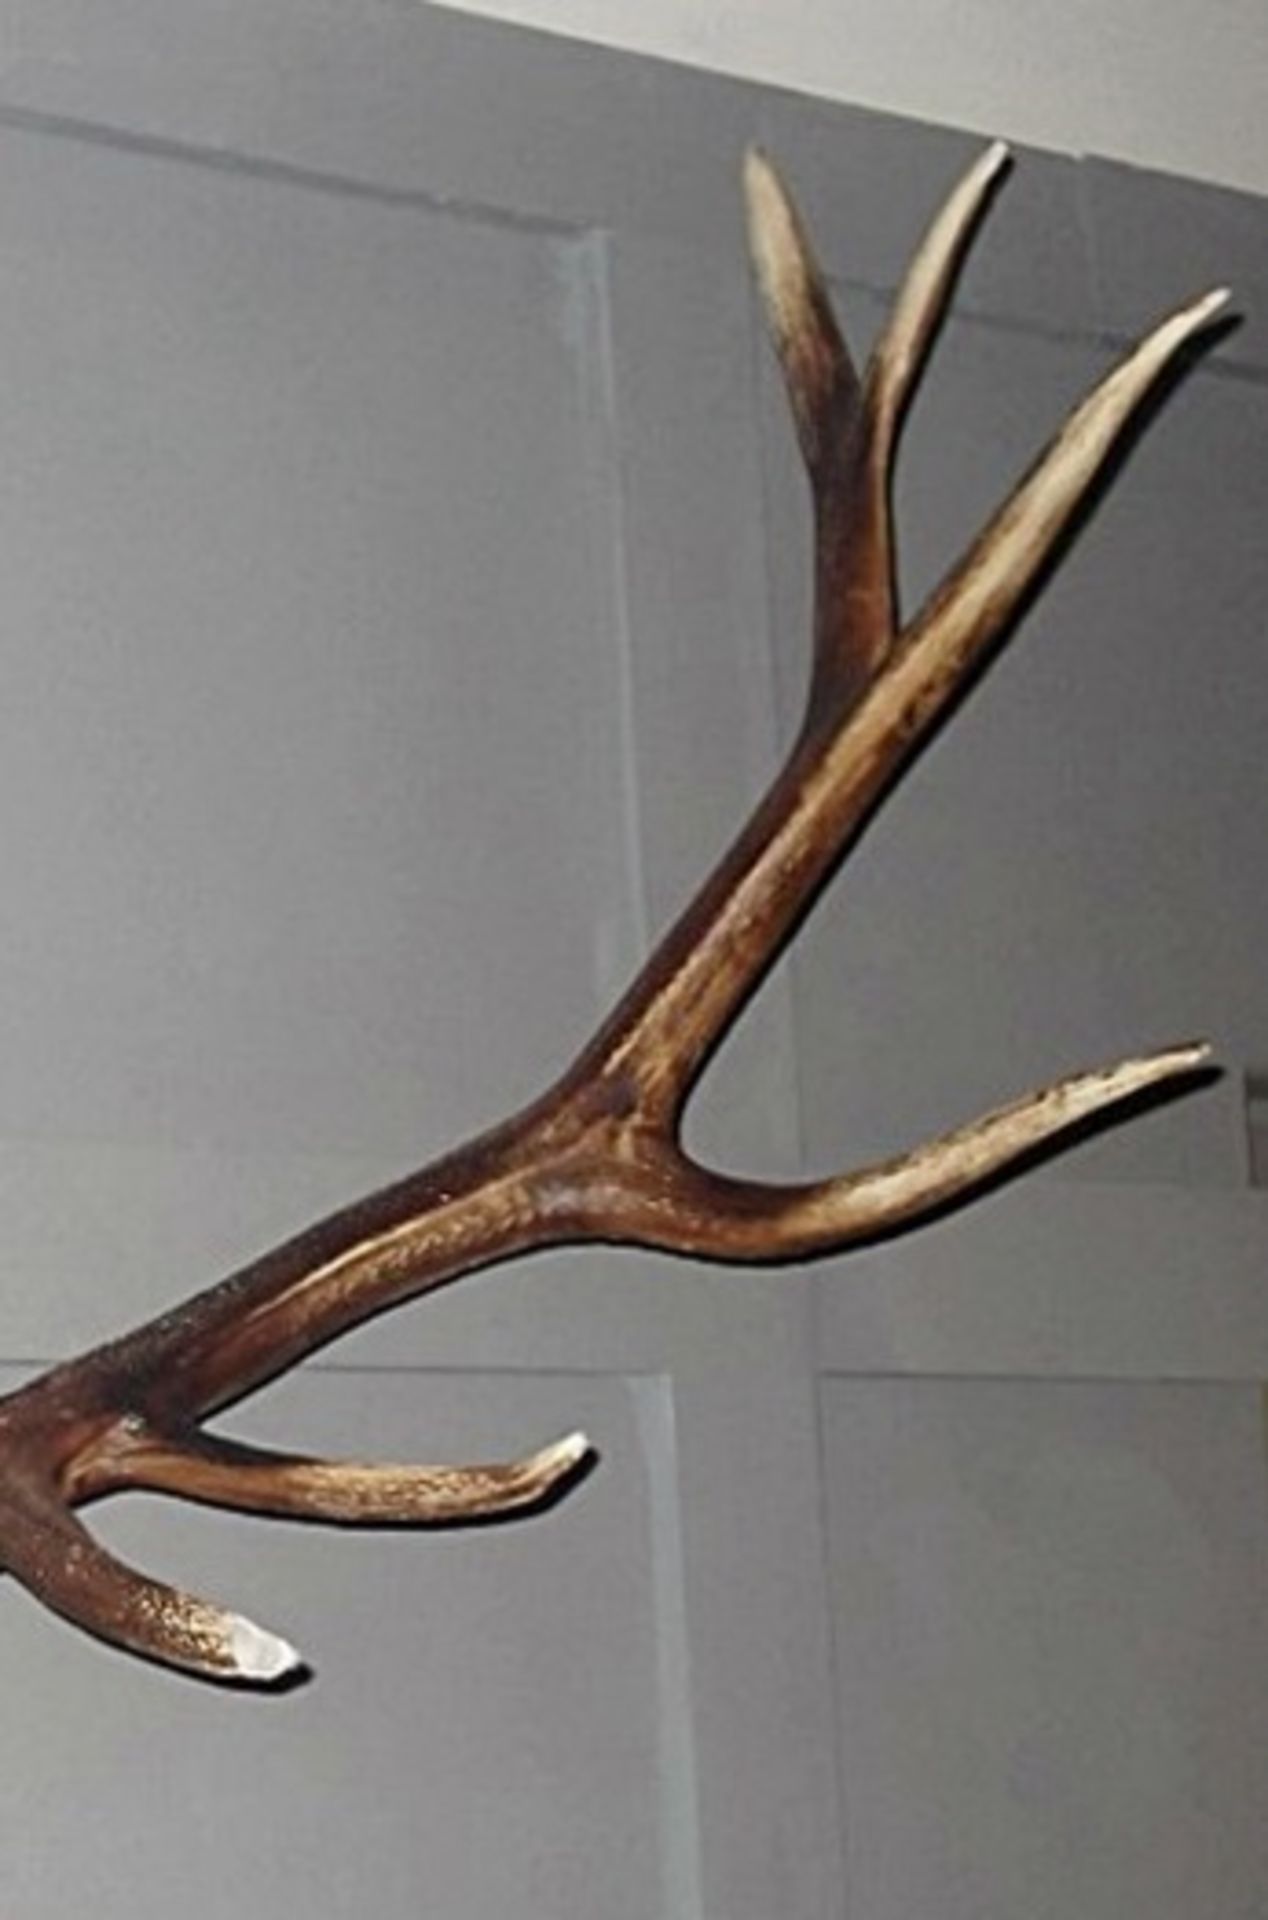 1 x Trophy Deer Skull Wall - Art Decoration - New / Unsuesd Stock - Very Realistic Faux Reproduction - Image 4 of 4